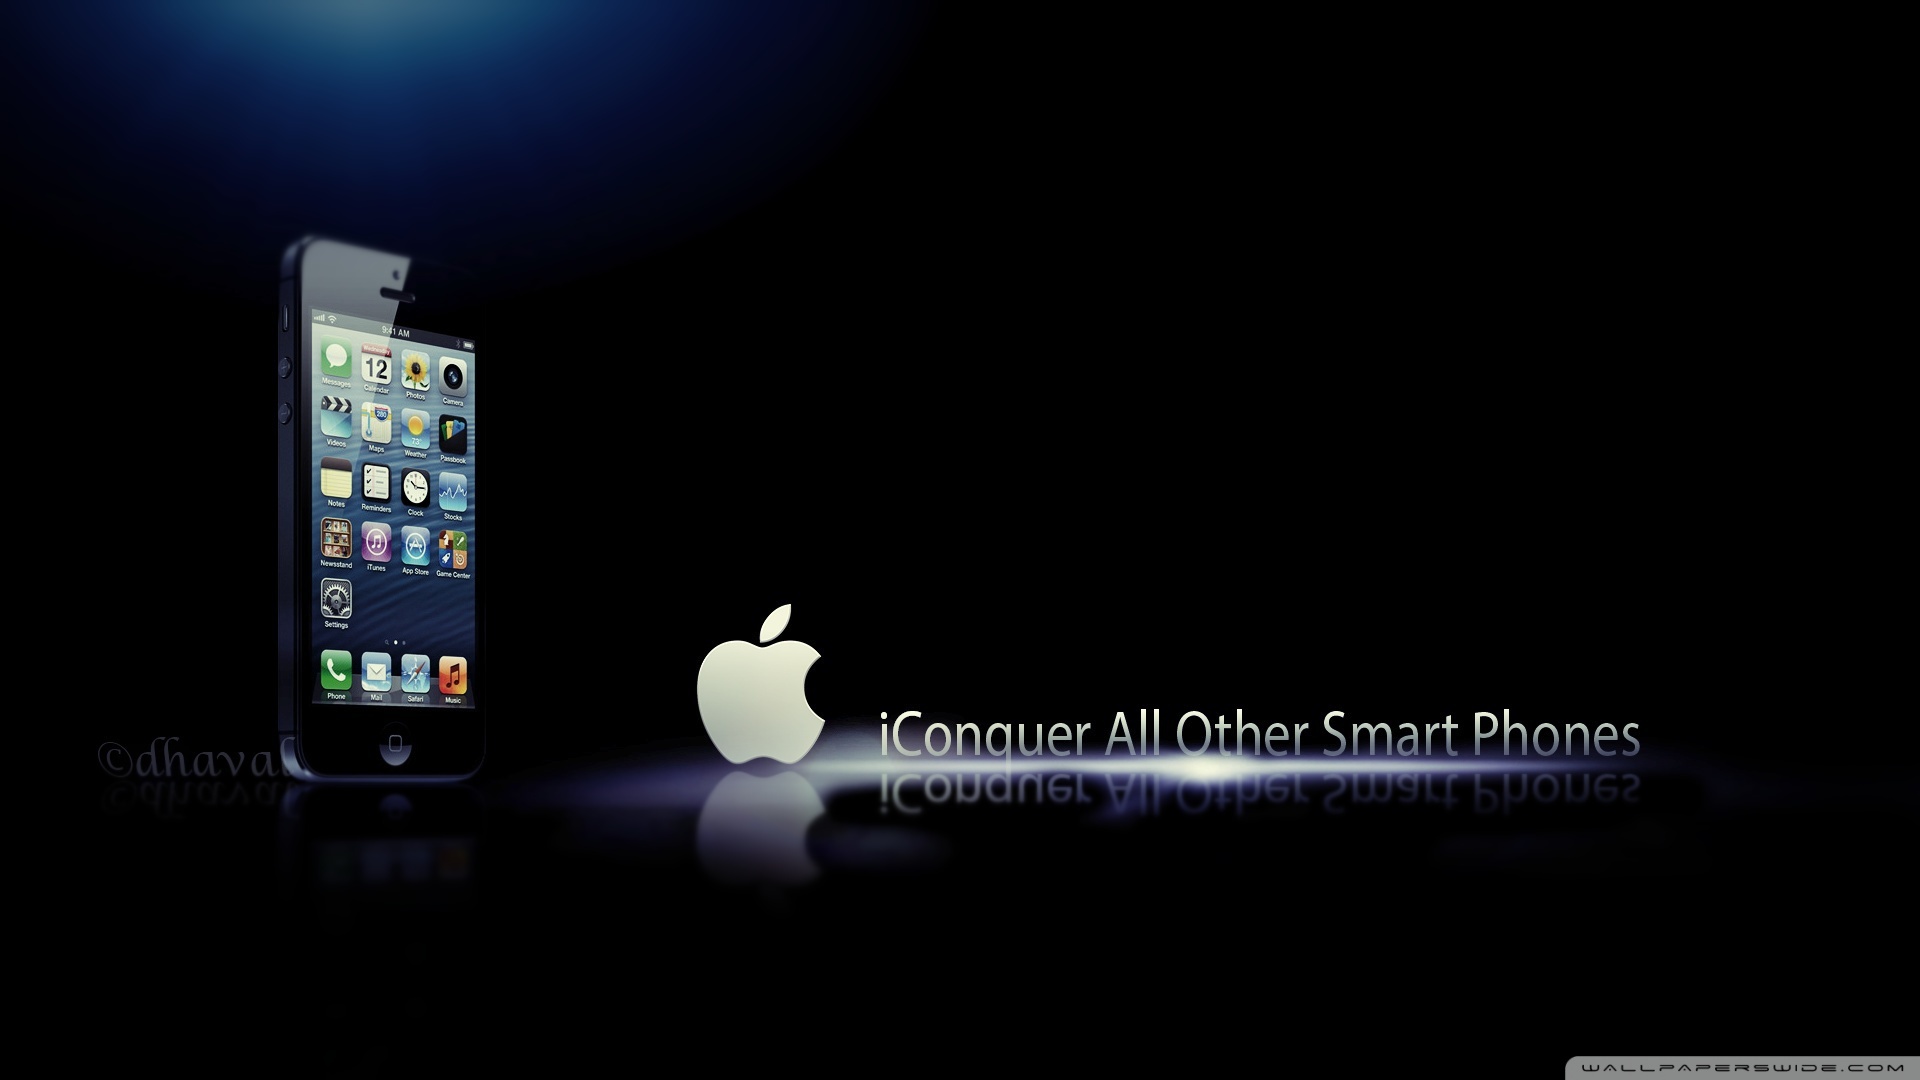 iphone 5s original wallpaper,electronics,product,operating system,gadget,technology